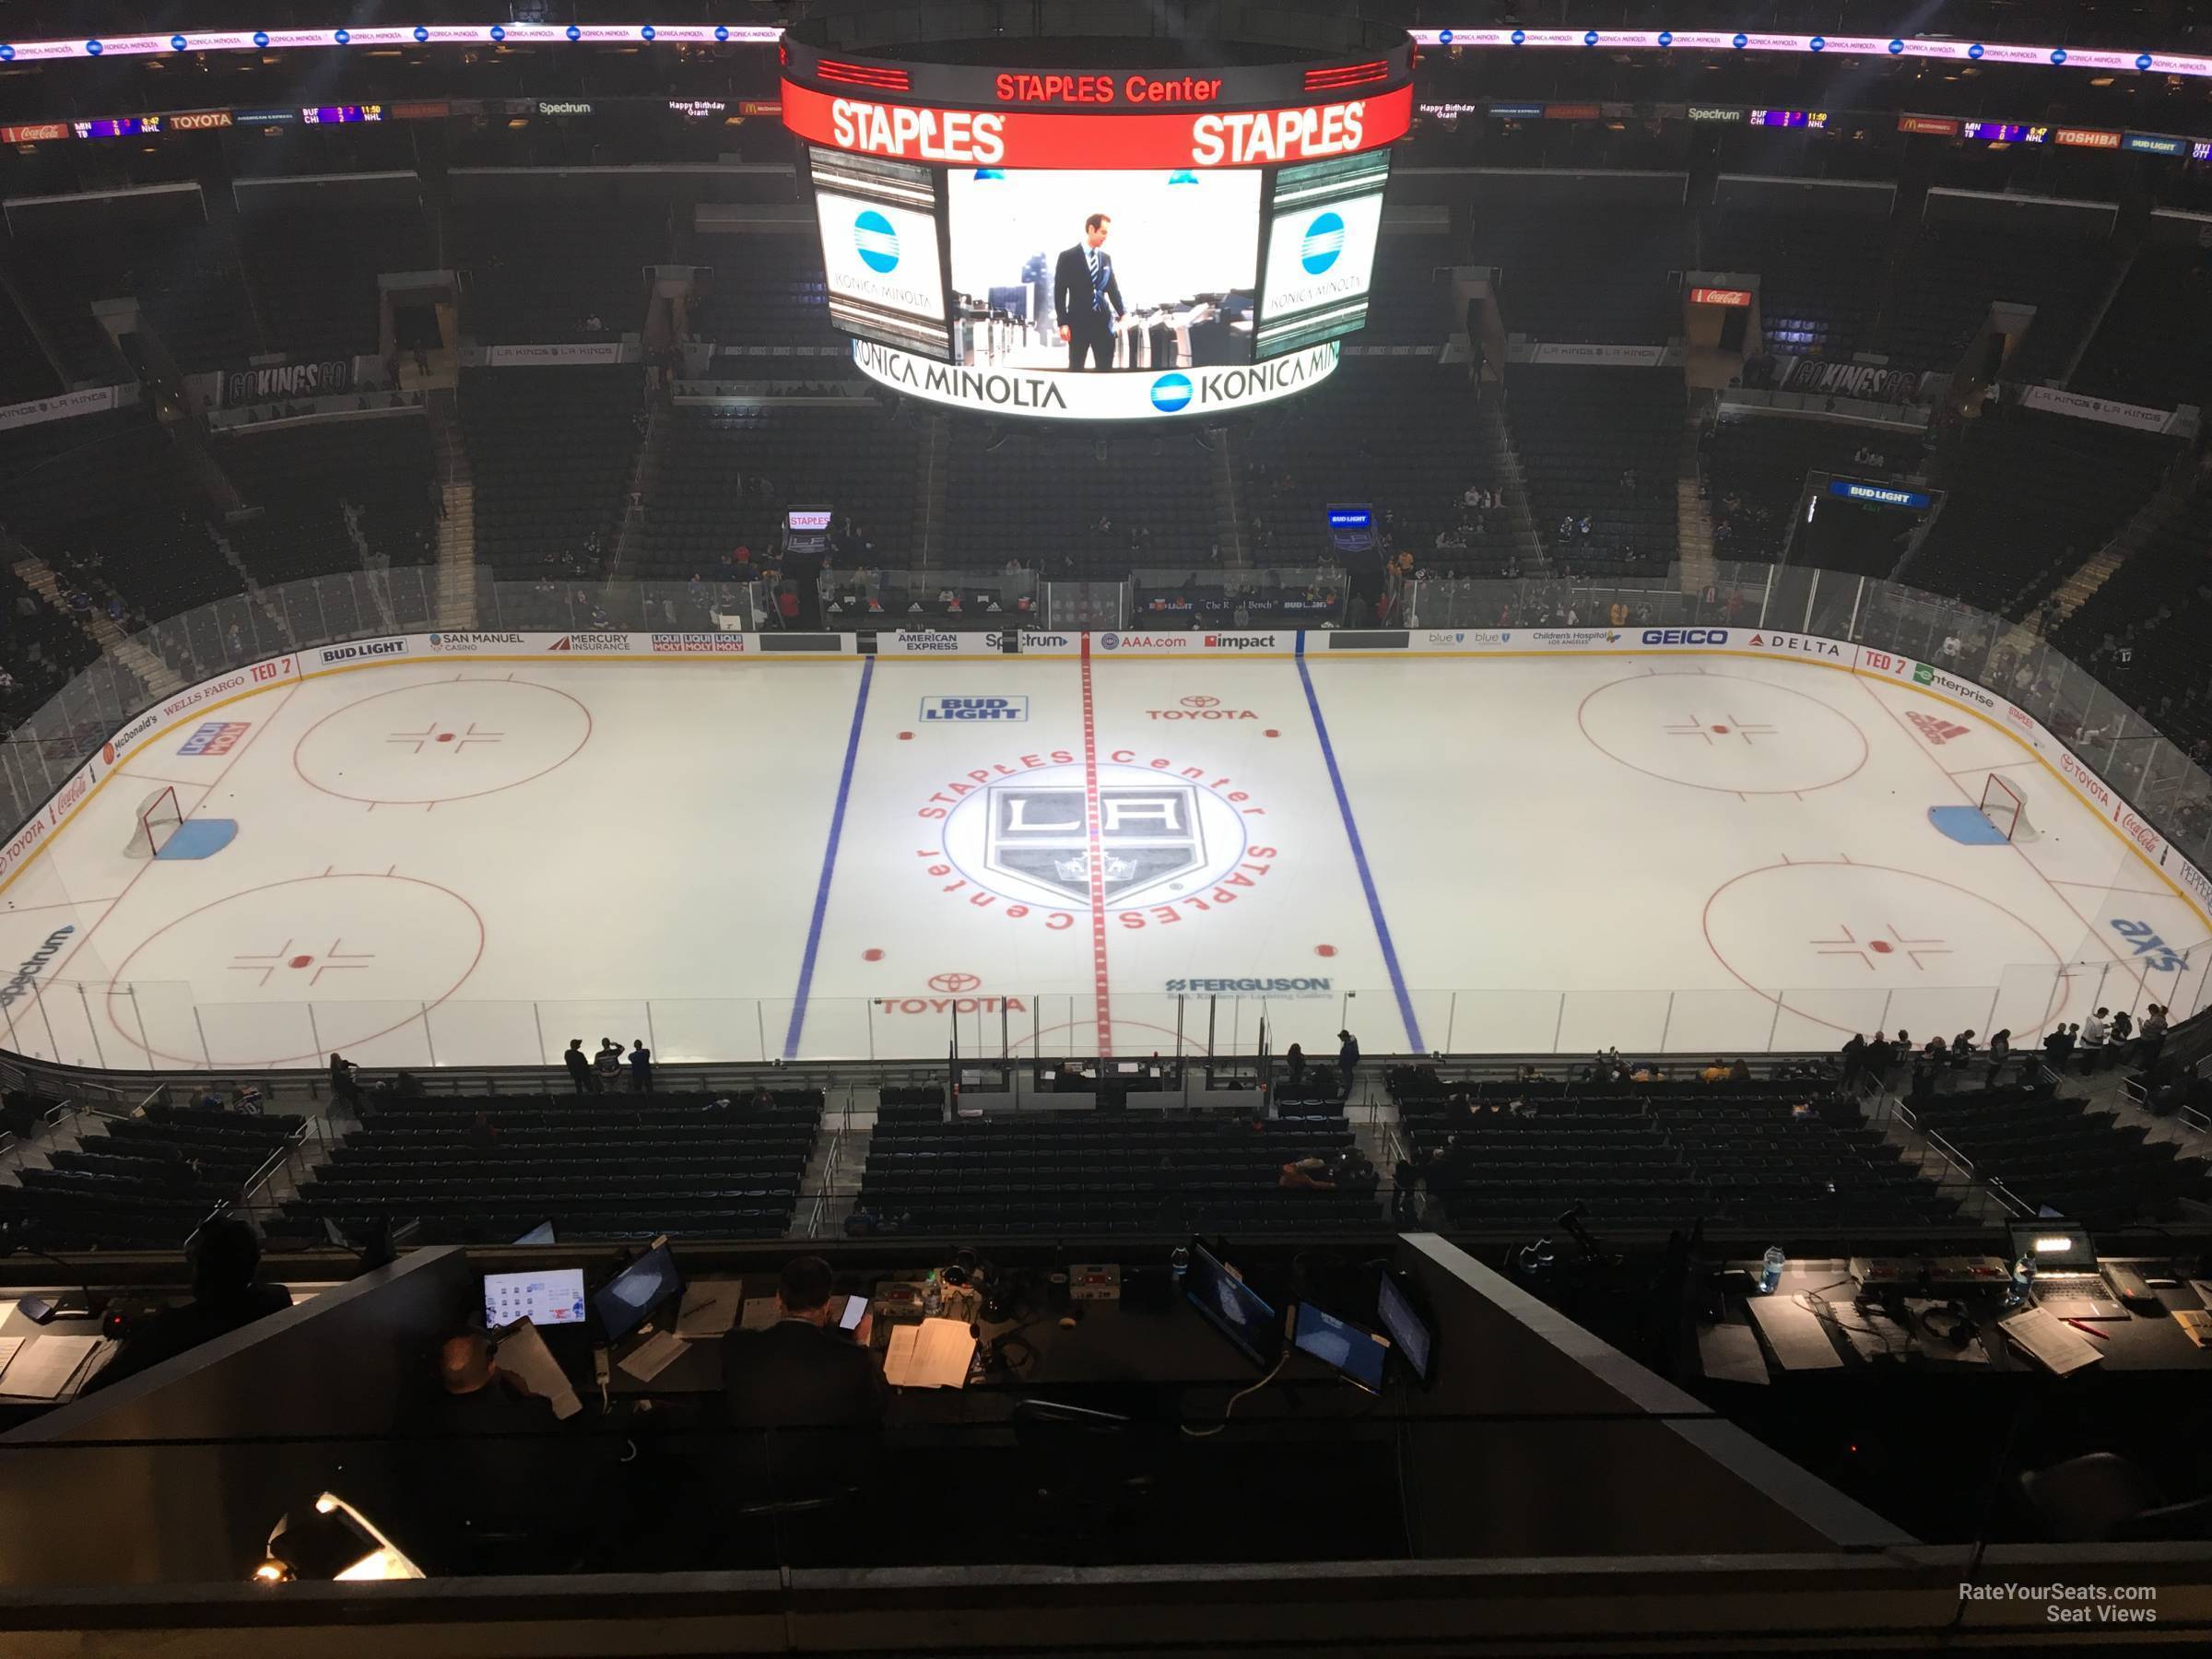 section 318, row 7 seat view  for hockey - crypto.com arena